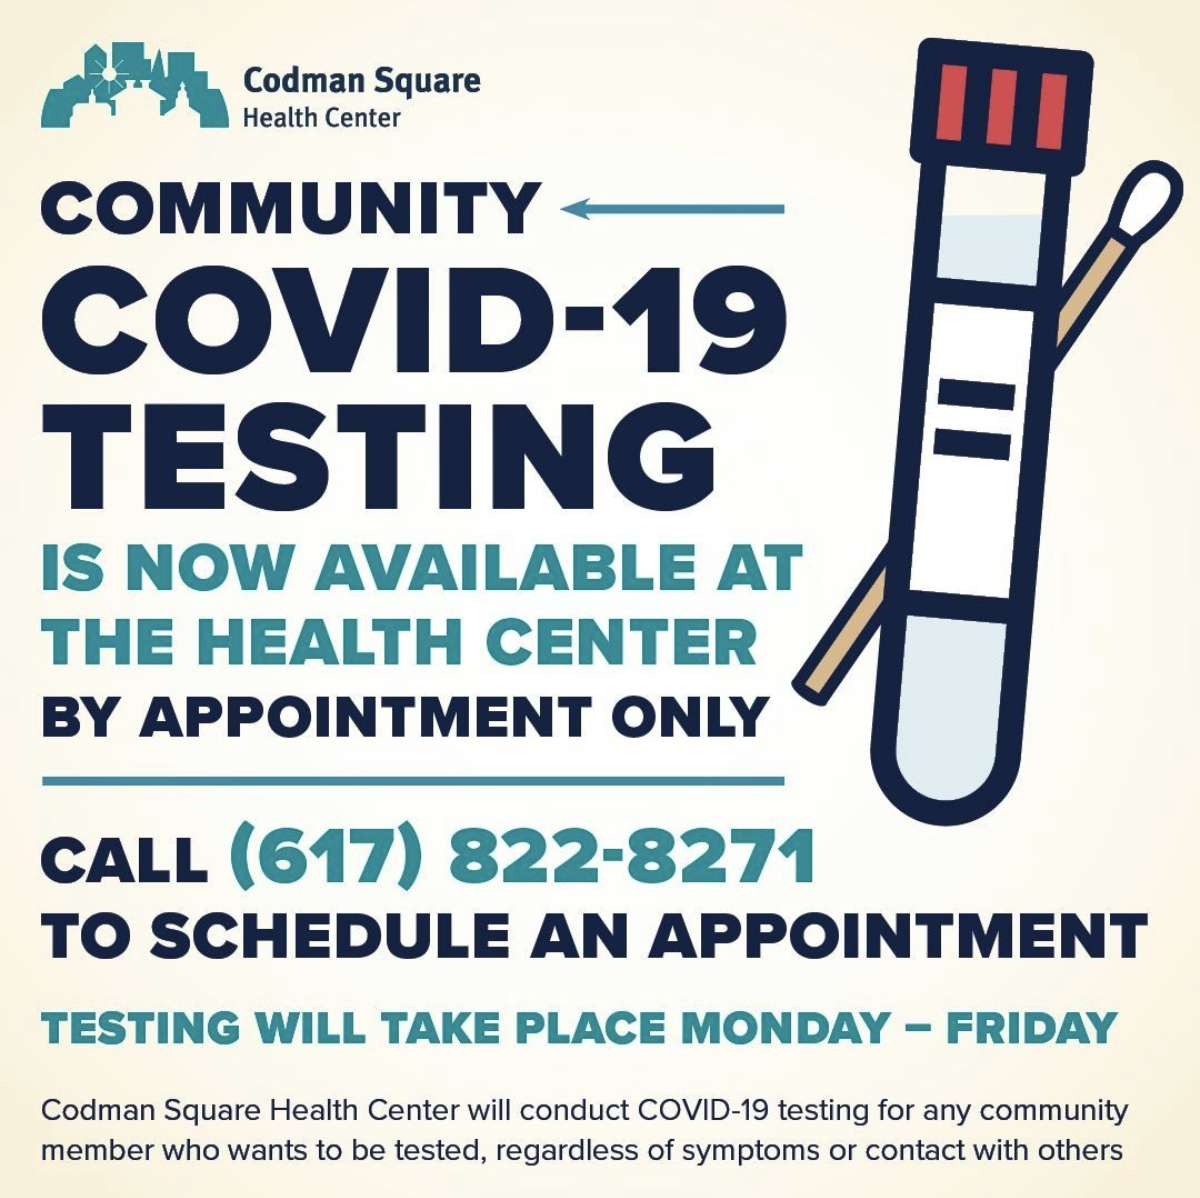 A Codman Square Health center flyer advertising appointment-only COVID-19 testing at the health center; teal and black text against a light yellow background, with Codman's logo in the upper left, and an illustration of a test tube and a swab on the upper right side.